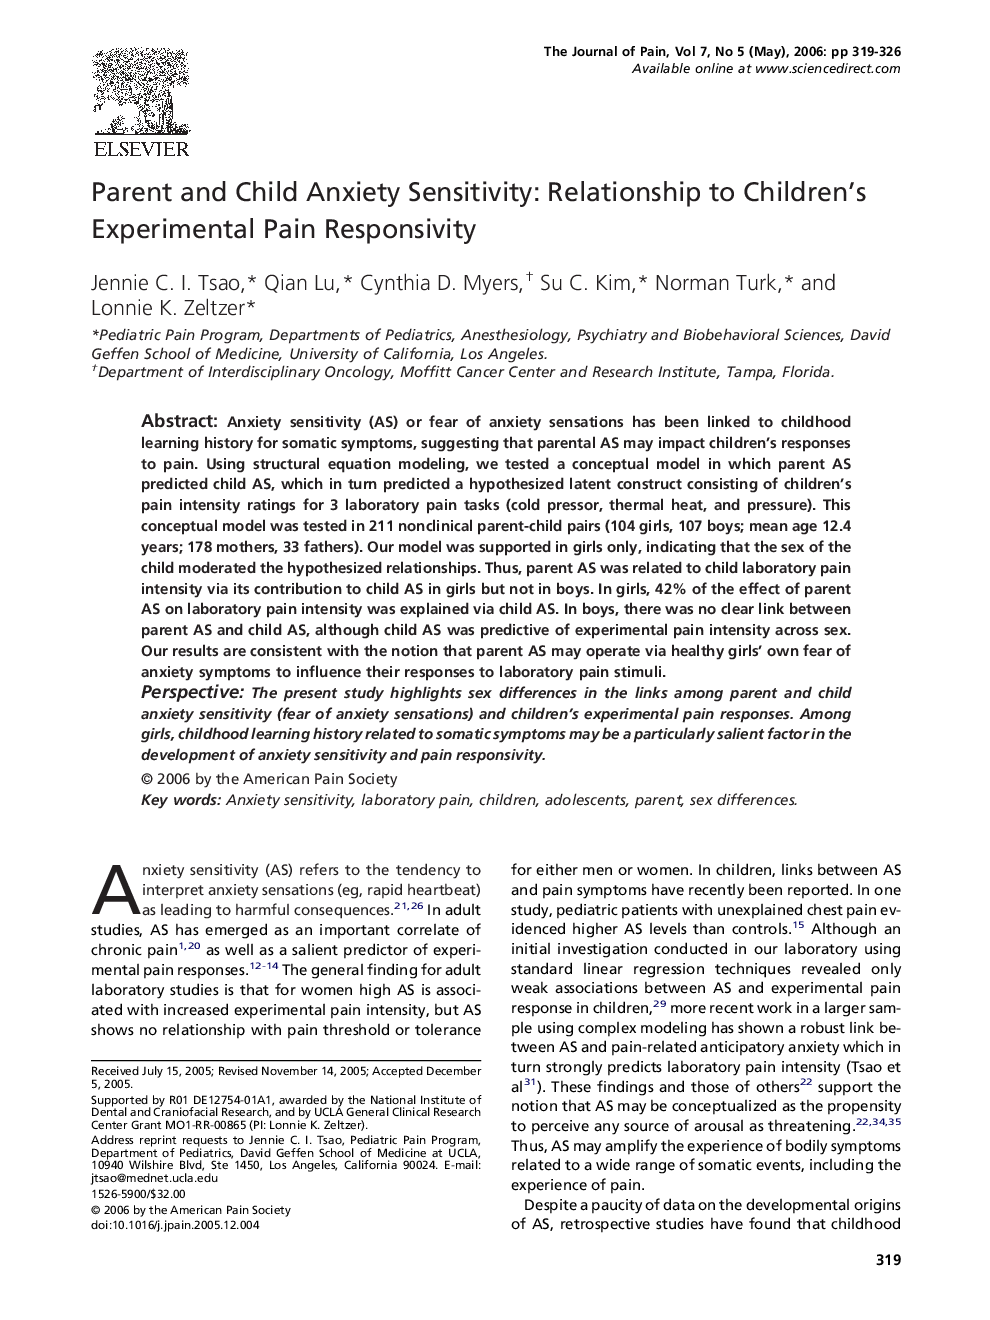 Parent and Child Anxiety Sensitivity: Relationship to Children’s Experimental Pain Responsivity 